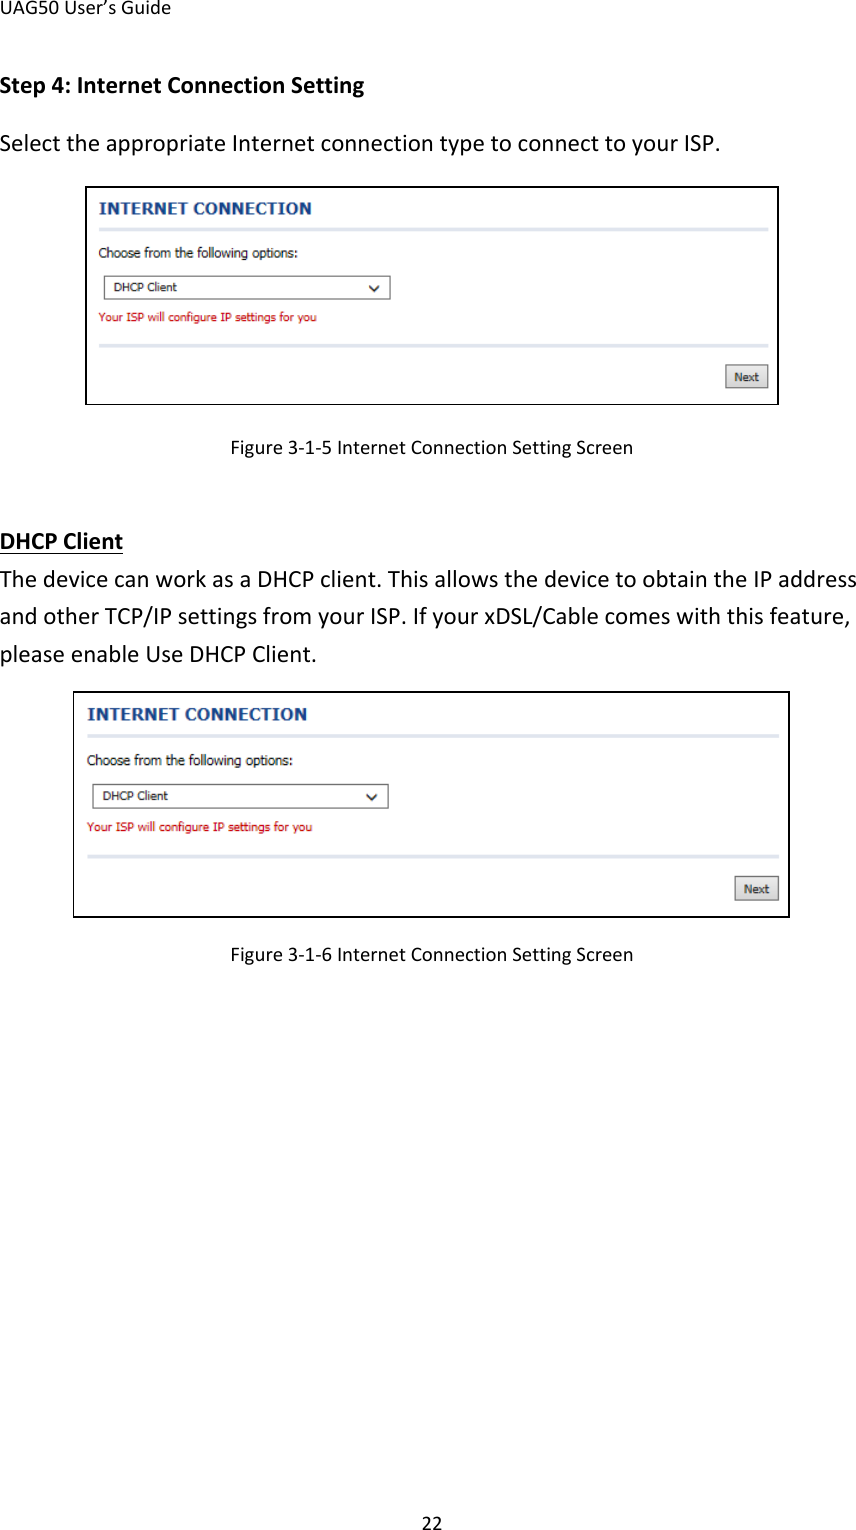 UAG50 User’s Guide 22 Step 4: Internet Connection Setting Select the appropriate Internet connection type to connect to your ISP.  Figure 3-1-5 Internet Connection Setting Screen  The device can work as a DHCP client. This allows the device to obtain the IP address and other TCP/IP settings from your ISP. If your xDSL/Cable comes with this feature, please enable Use DHCP Client. DHCP Client  Figure 3-1-6 Internet Connection Setting Screen 